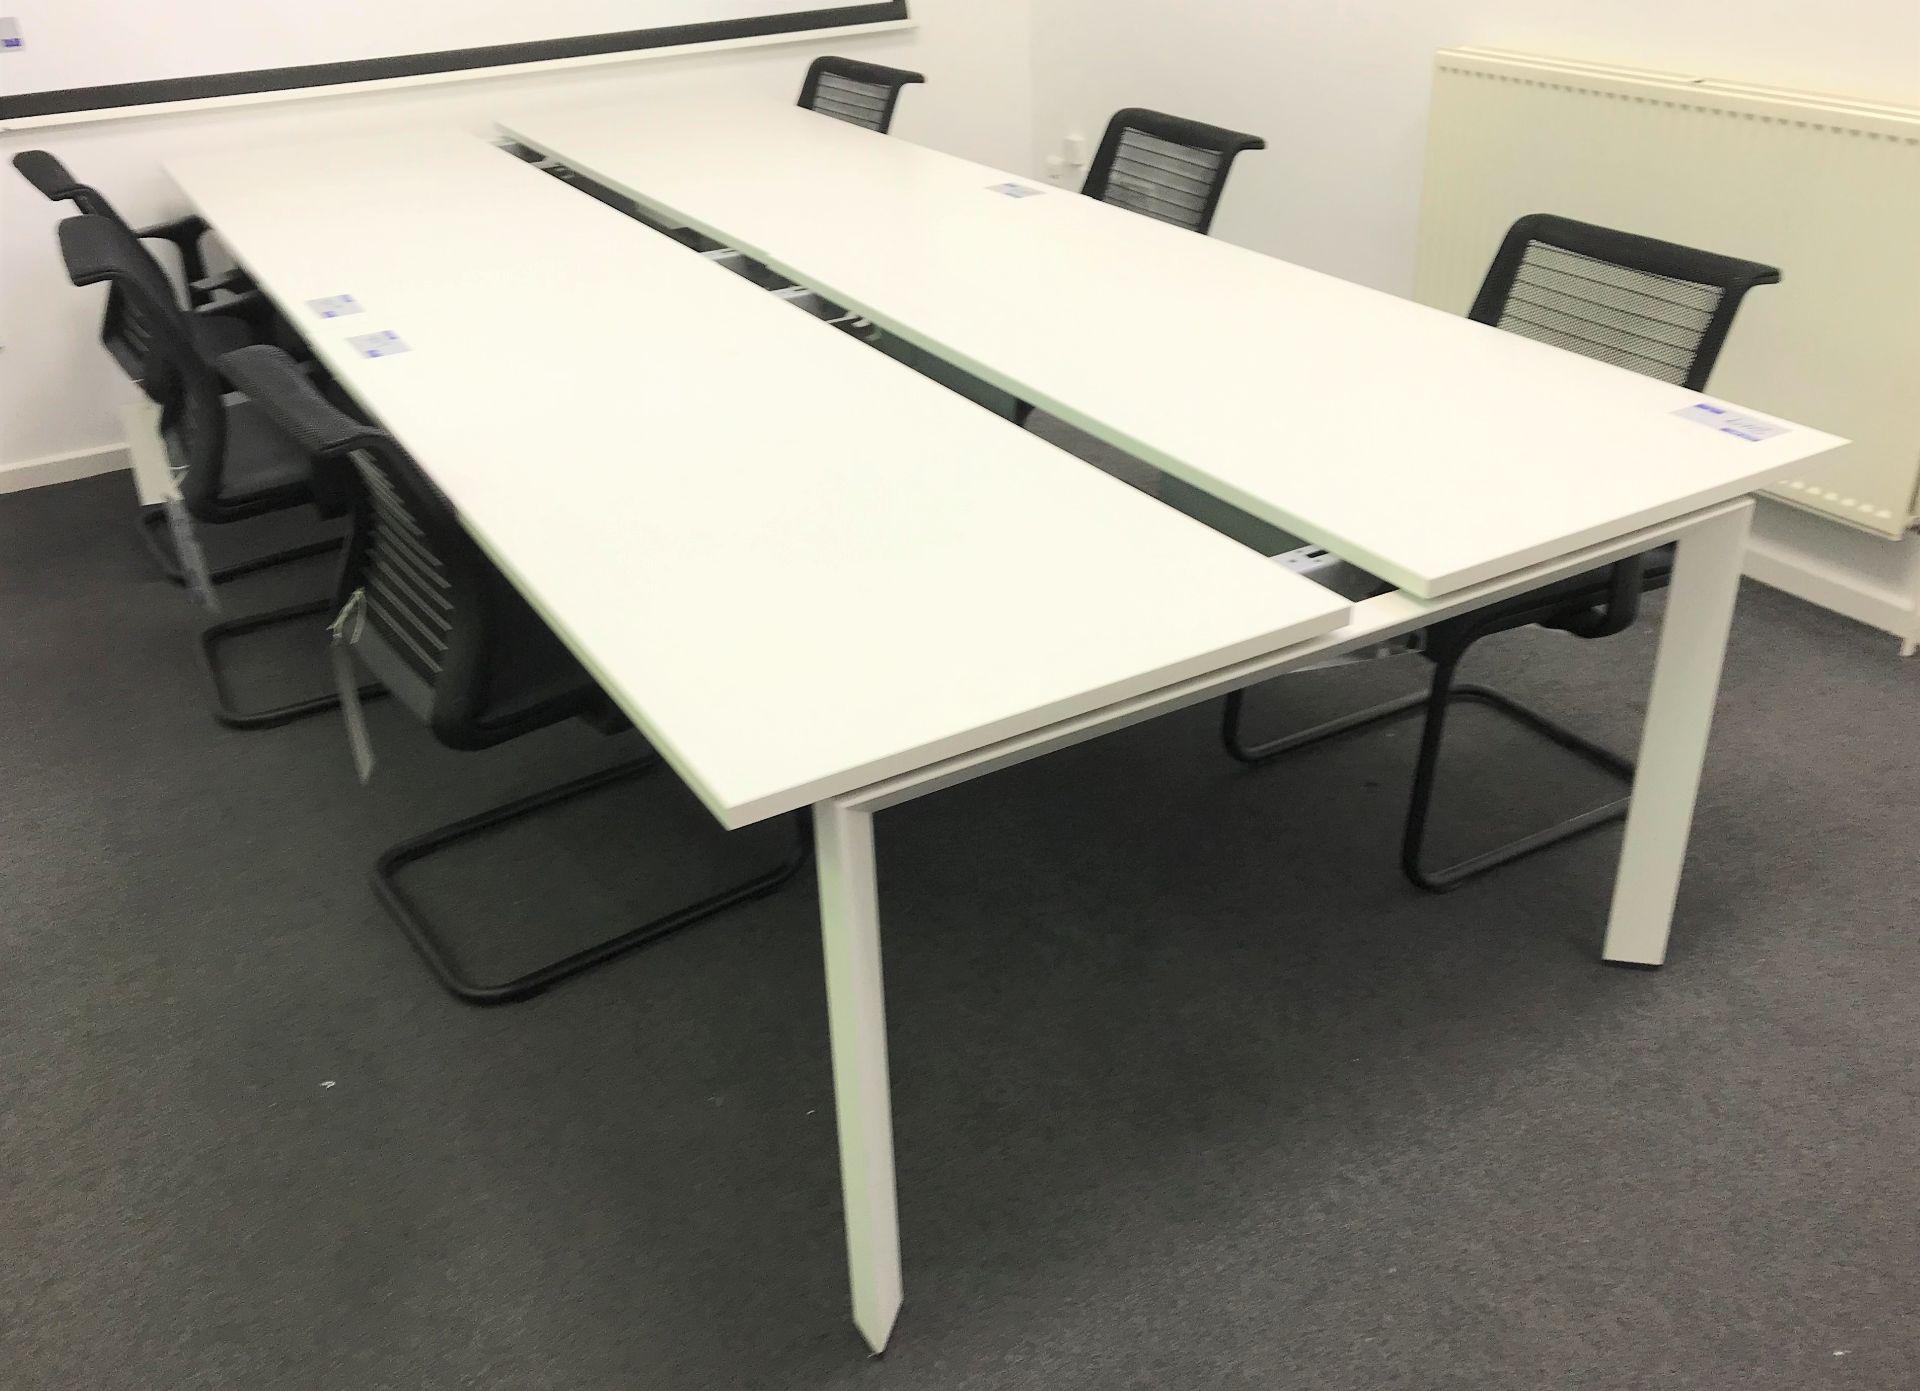 A Steelcase 4 position Modular Workstation with Integral Cable Tray, each position 1600 x 680 x